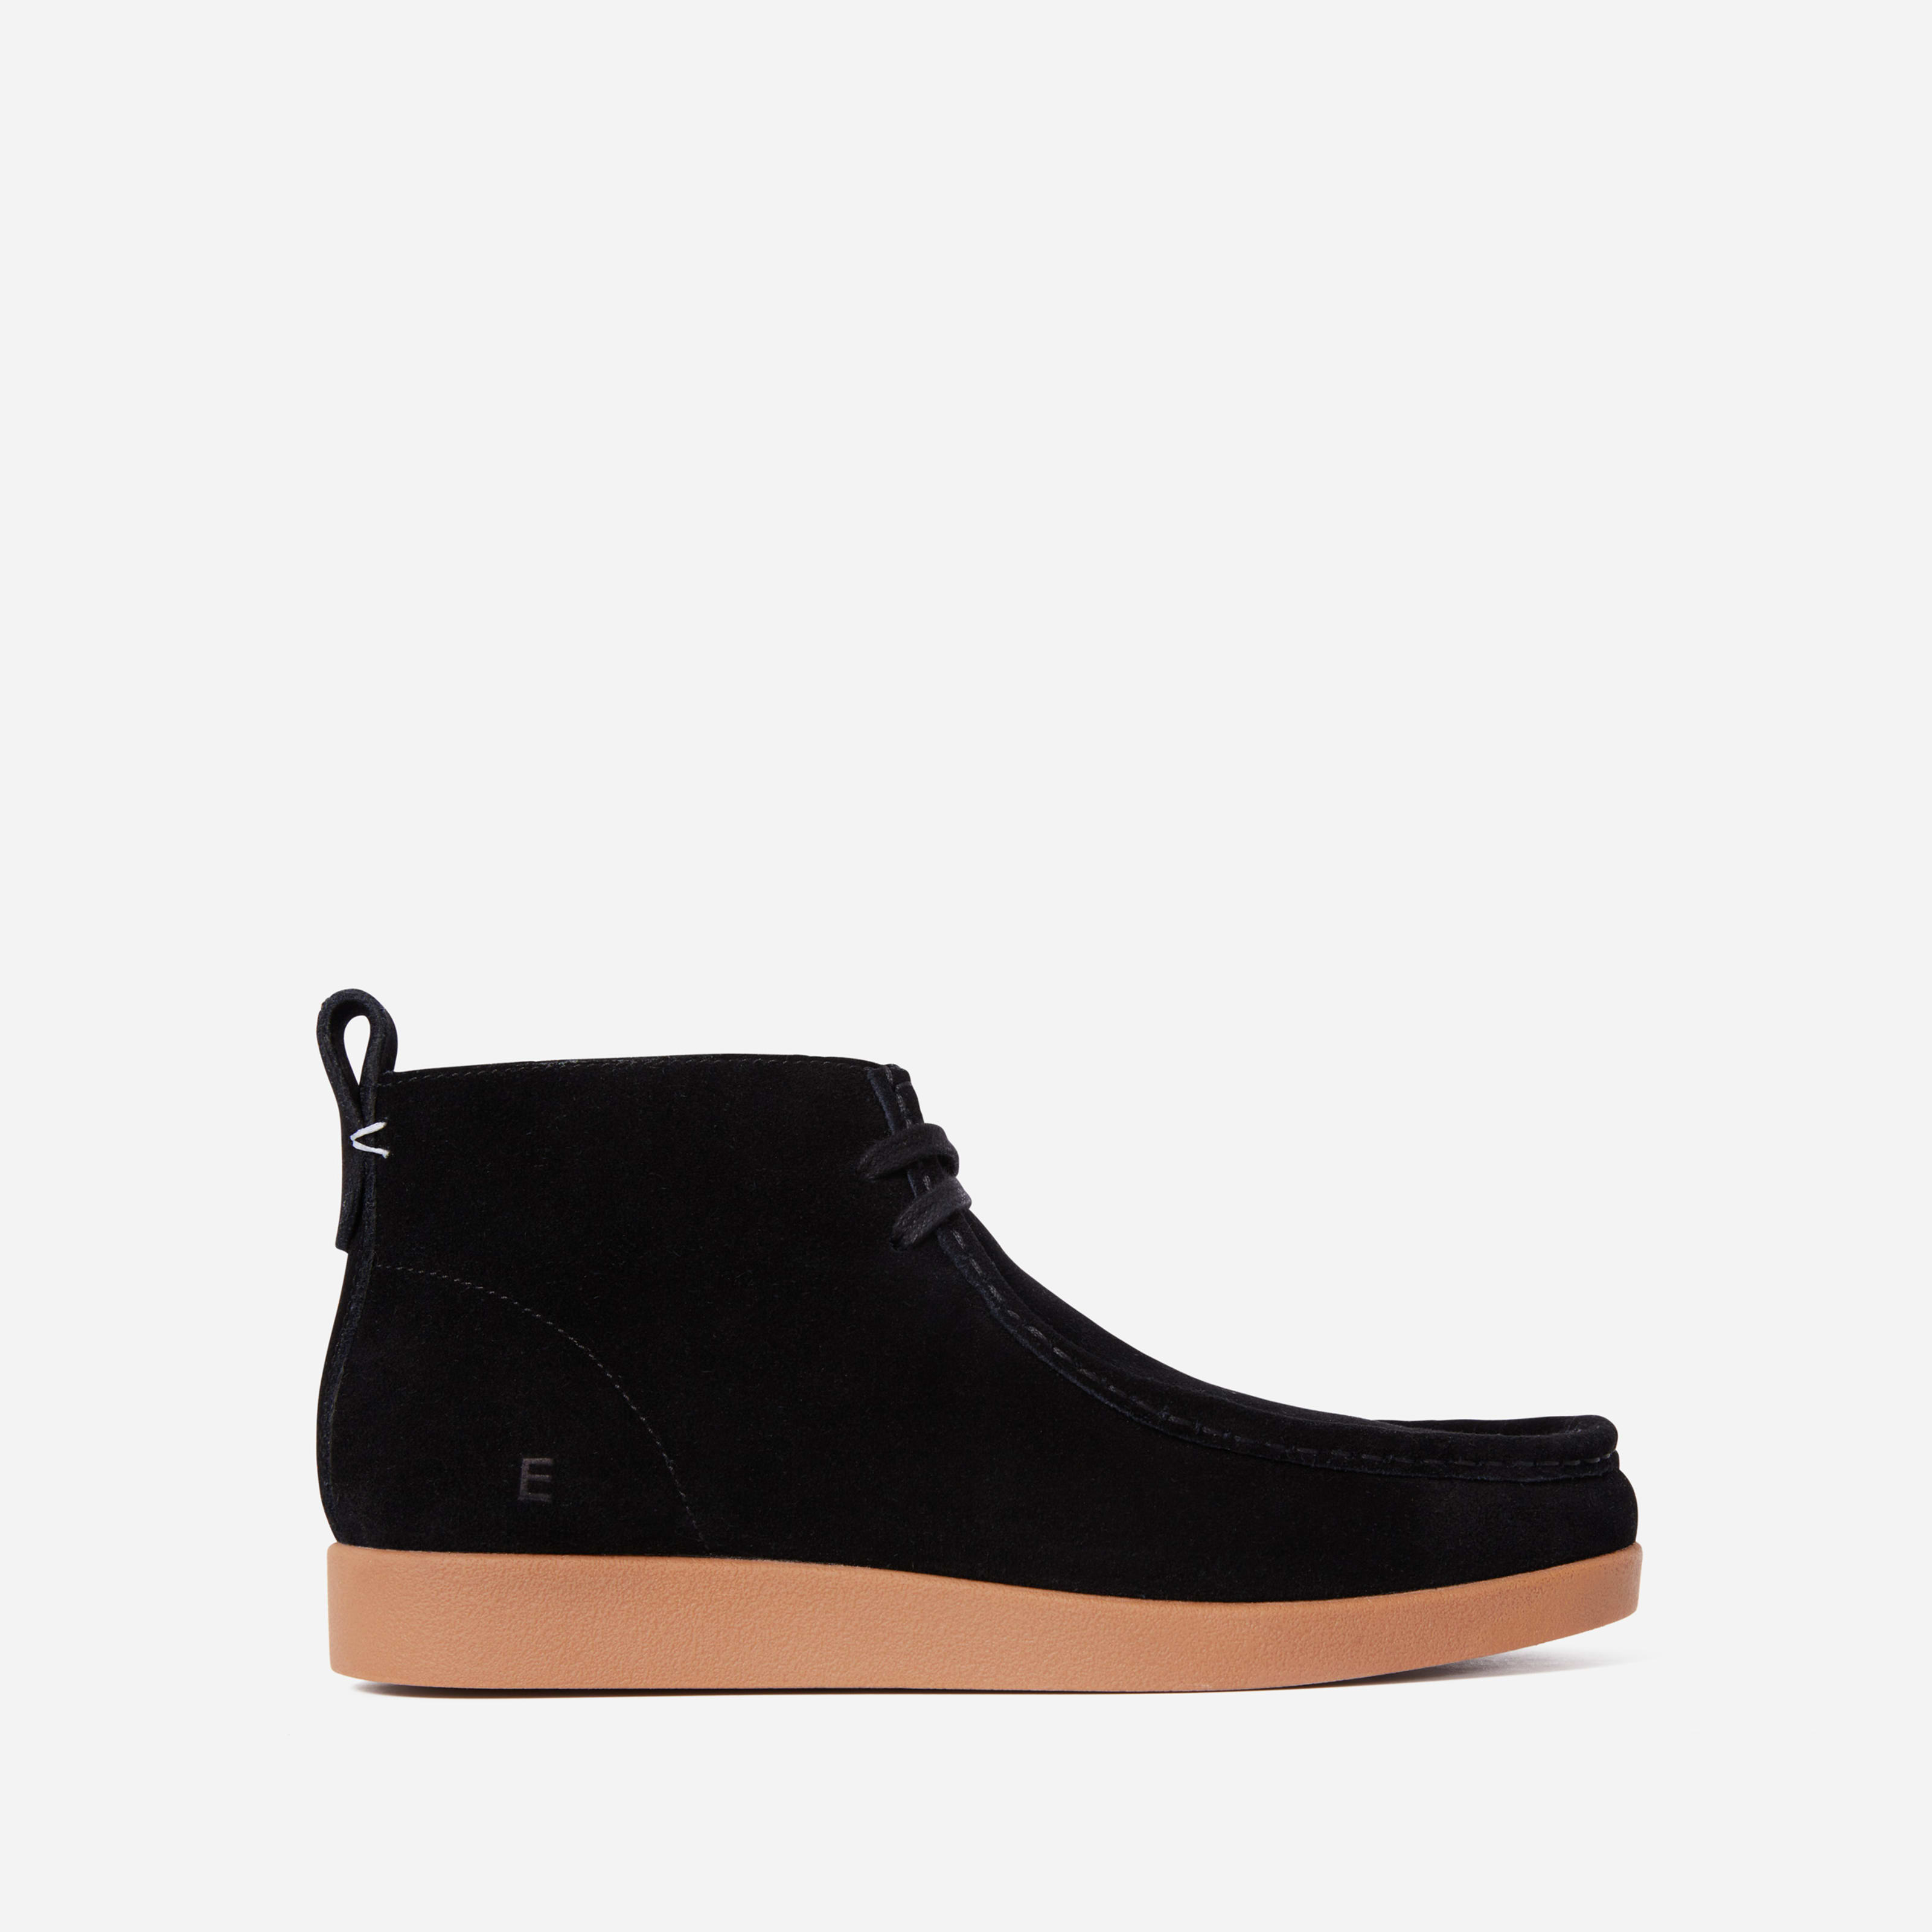 Moc-Toe Boot By Everlane In Black Suede, Size 5